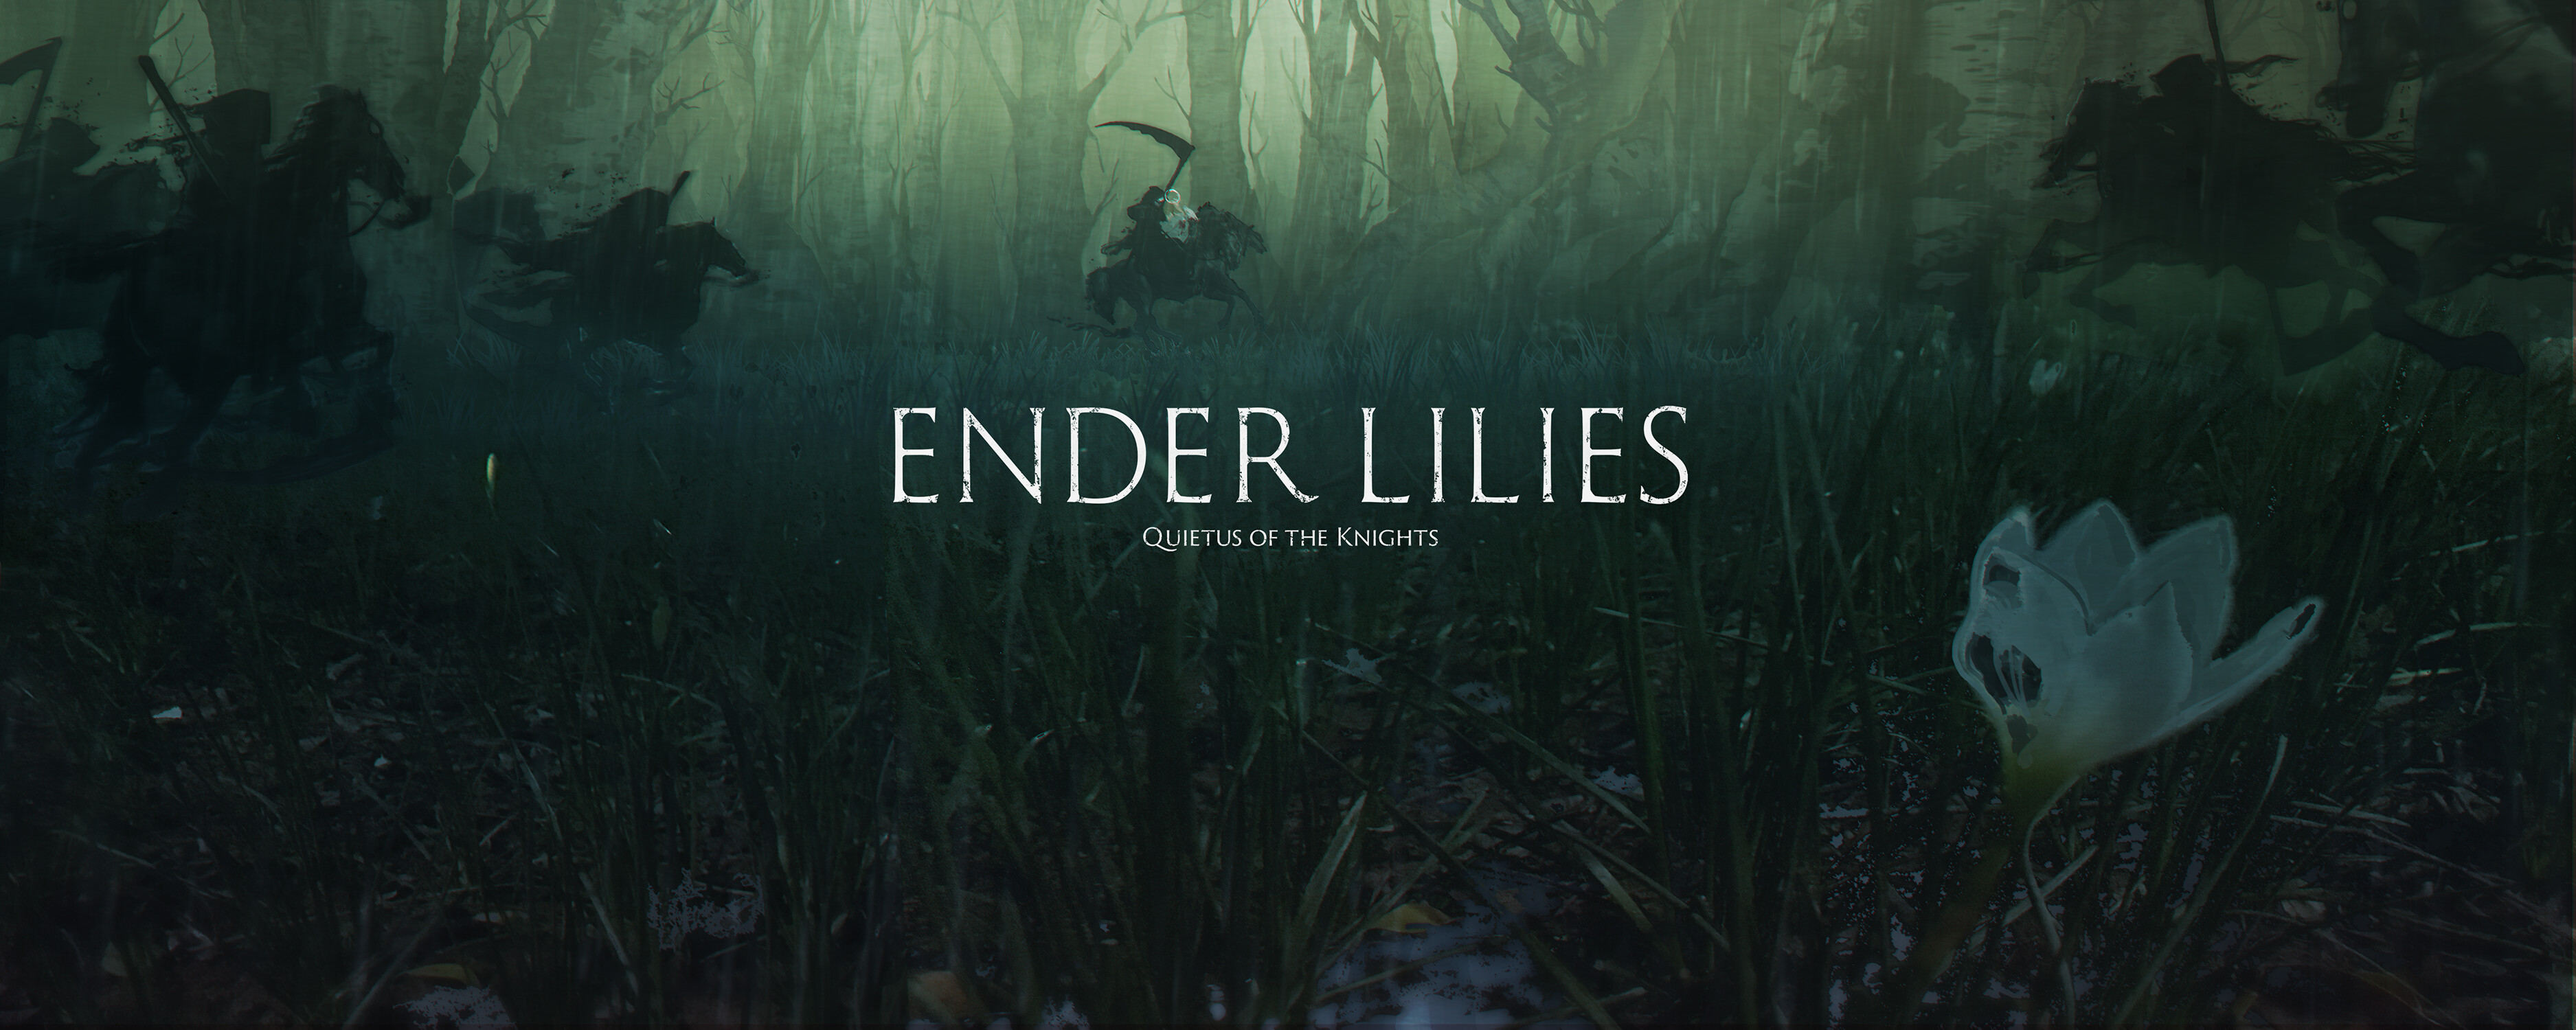 Game Photography Ender Lilies Reaper 3750x1500